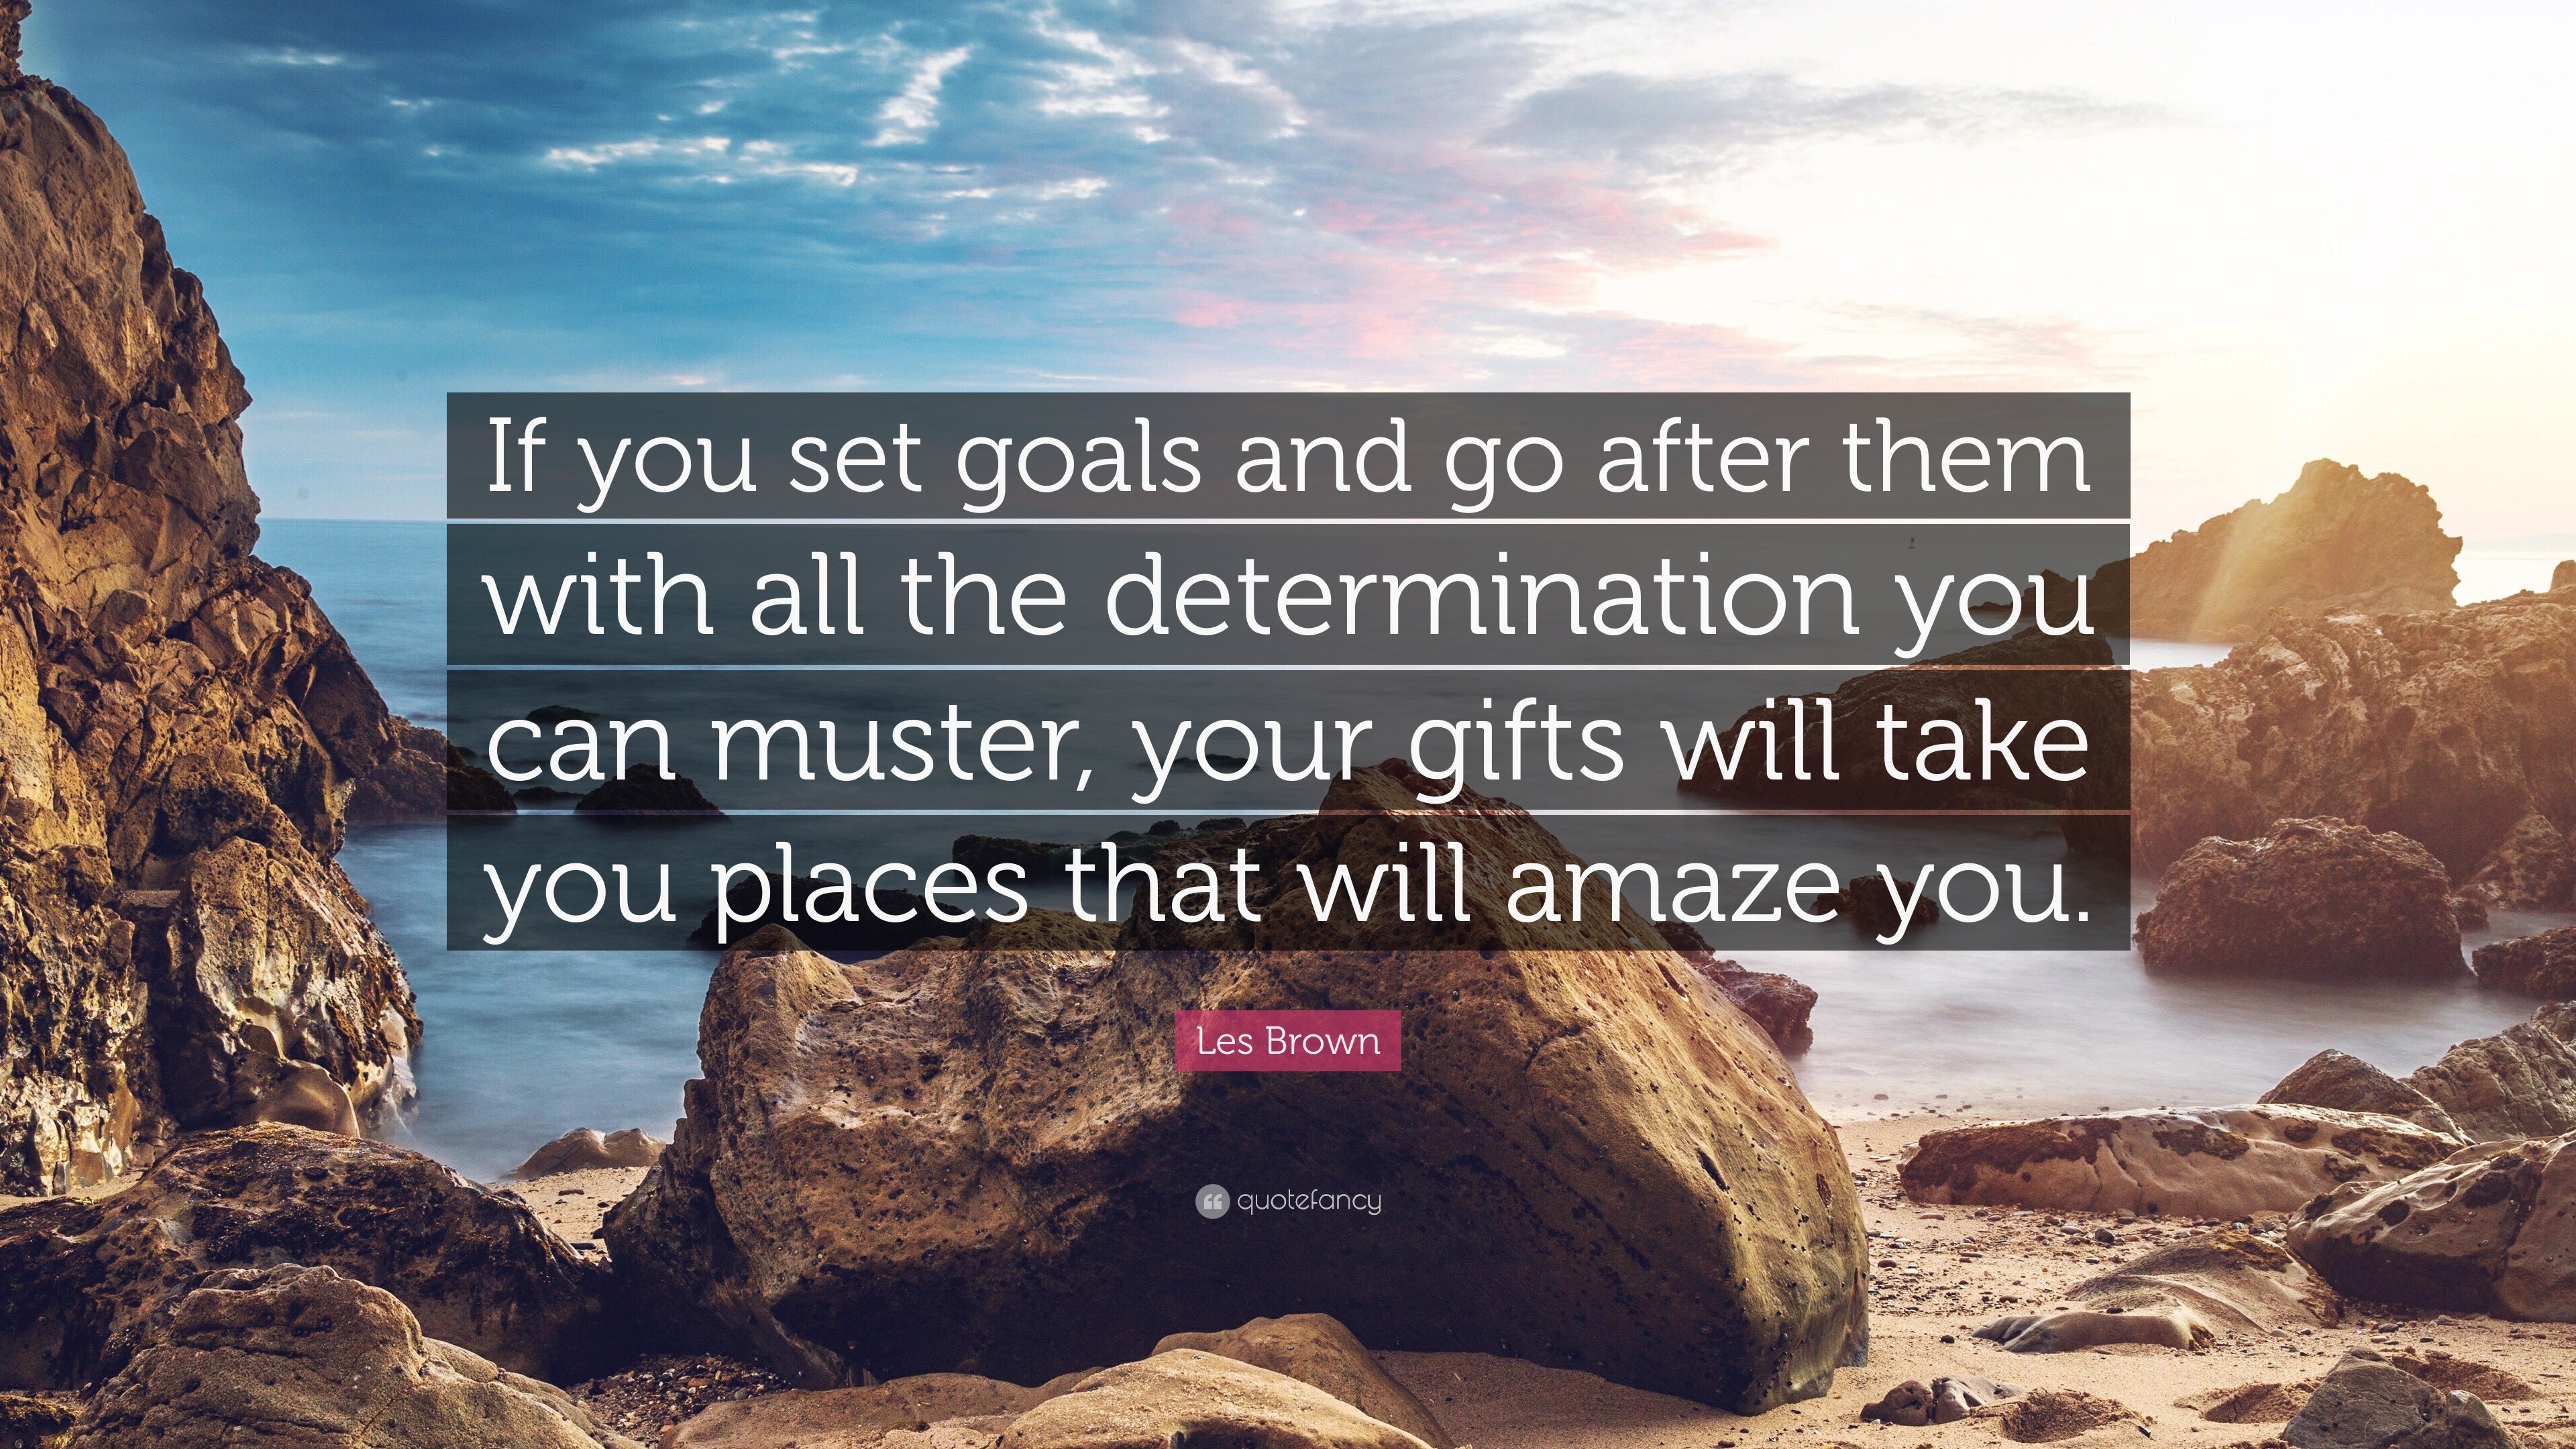 Les Brown Quote: “If you set goals and go after them with all the ...